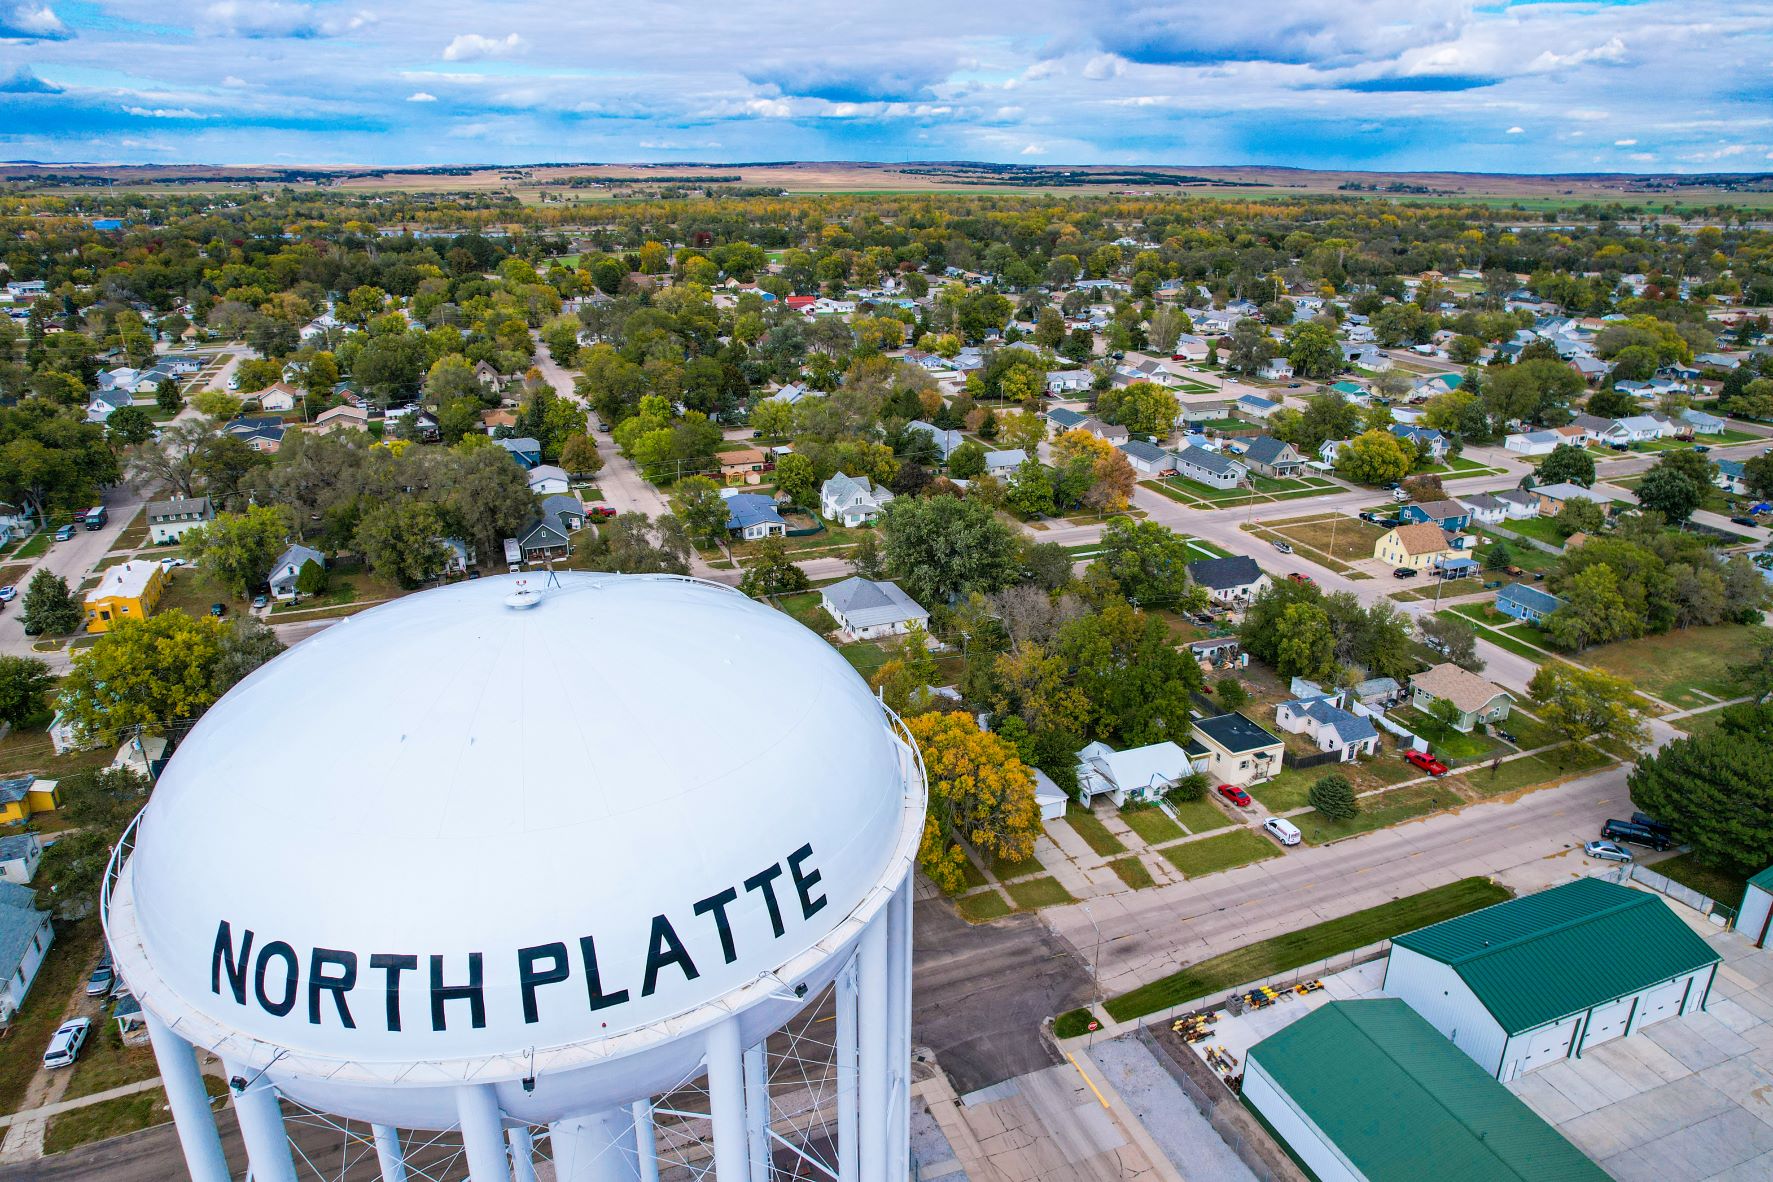 North Platte Shatters Building Permit Records